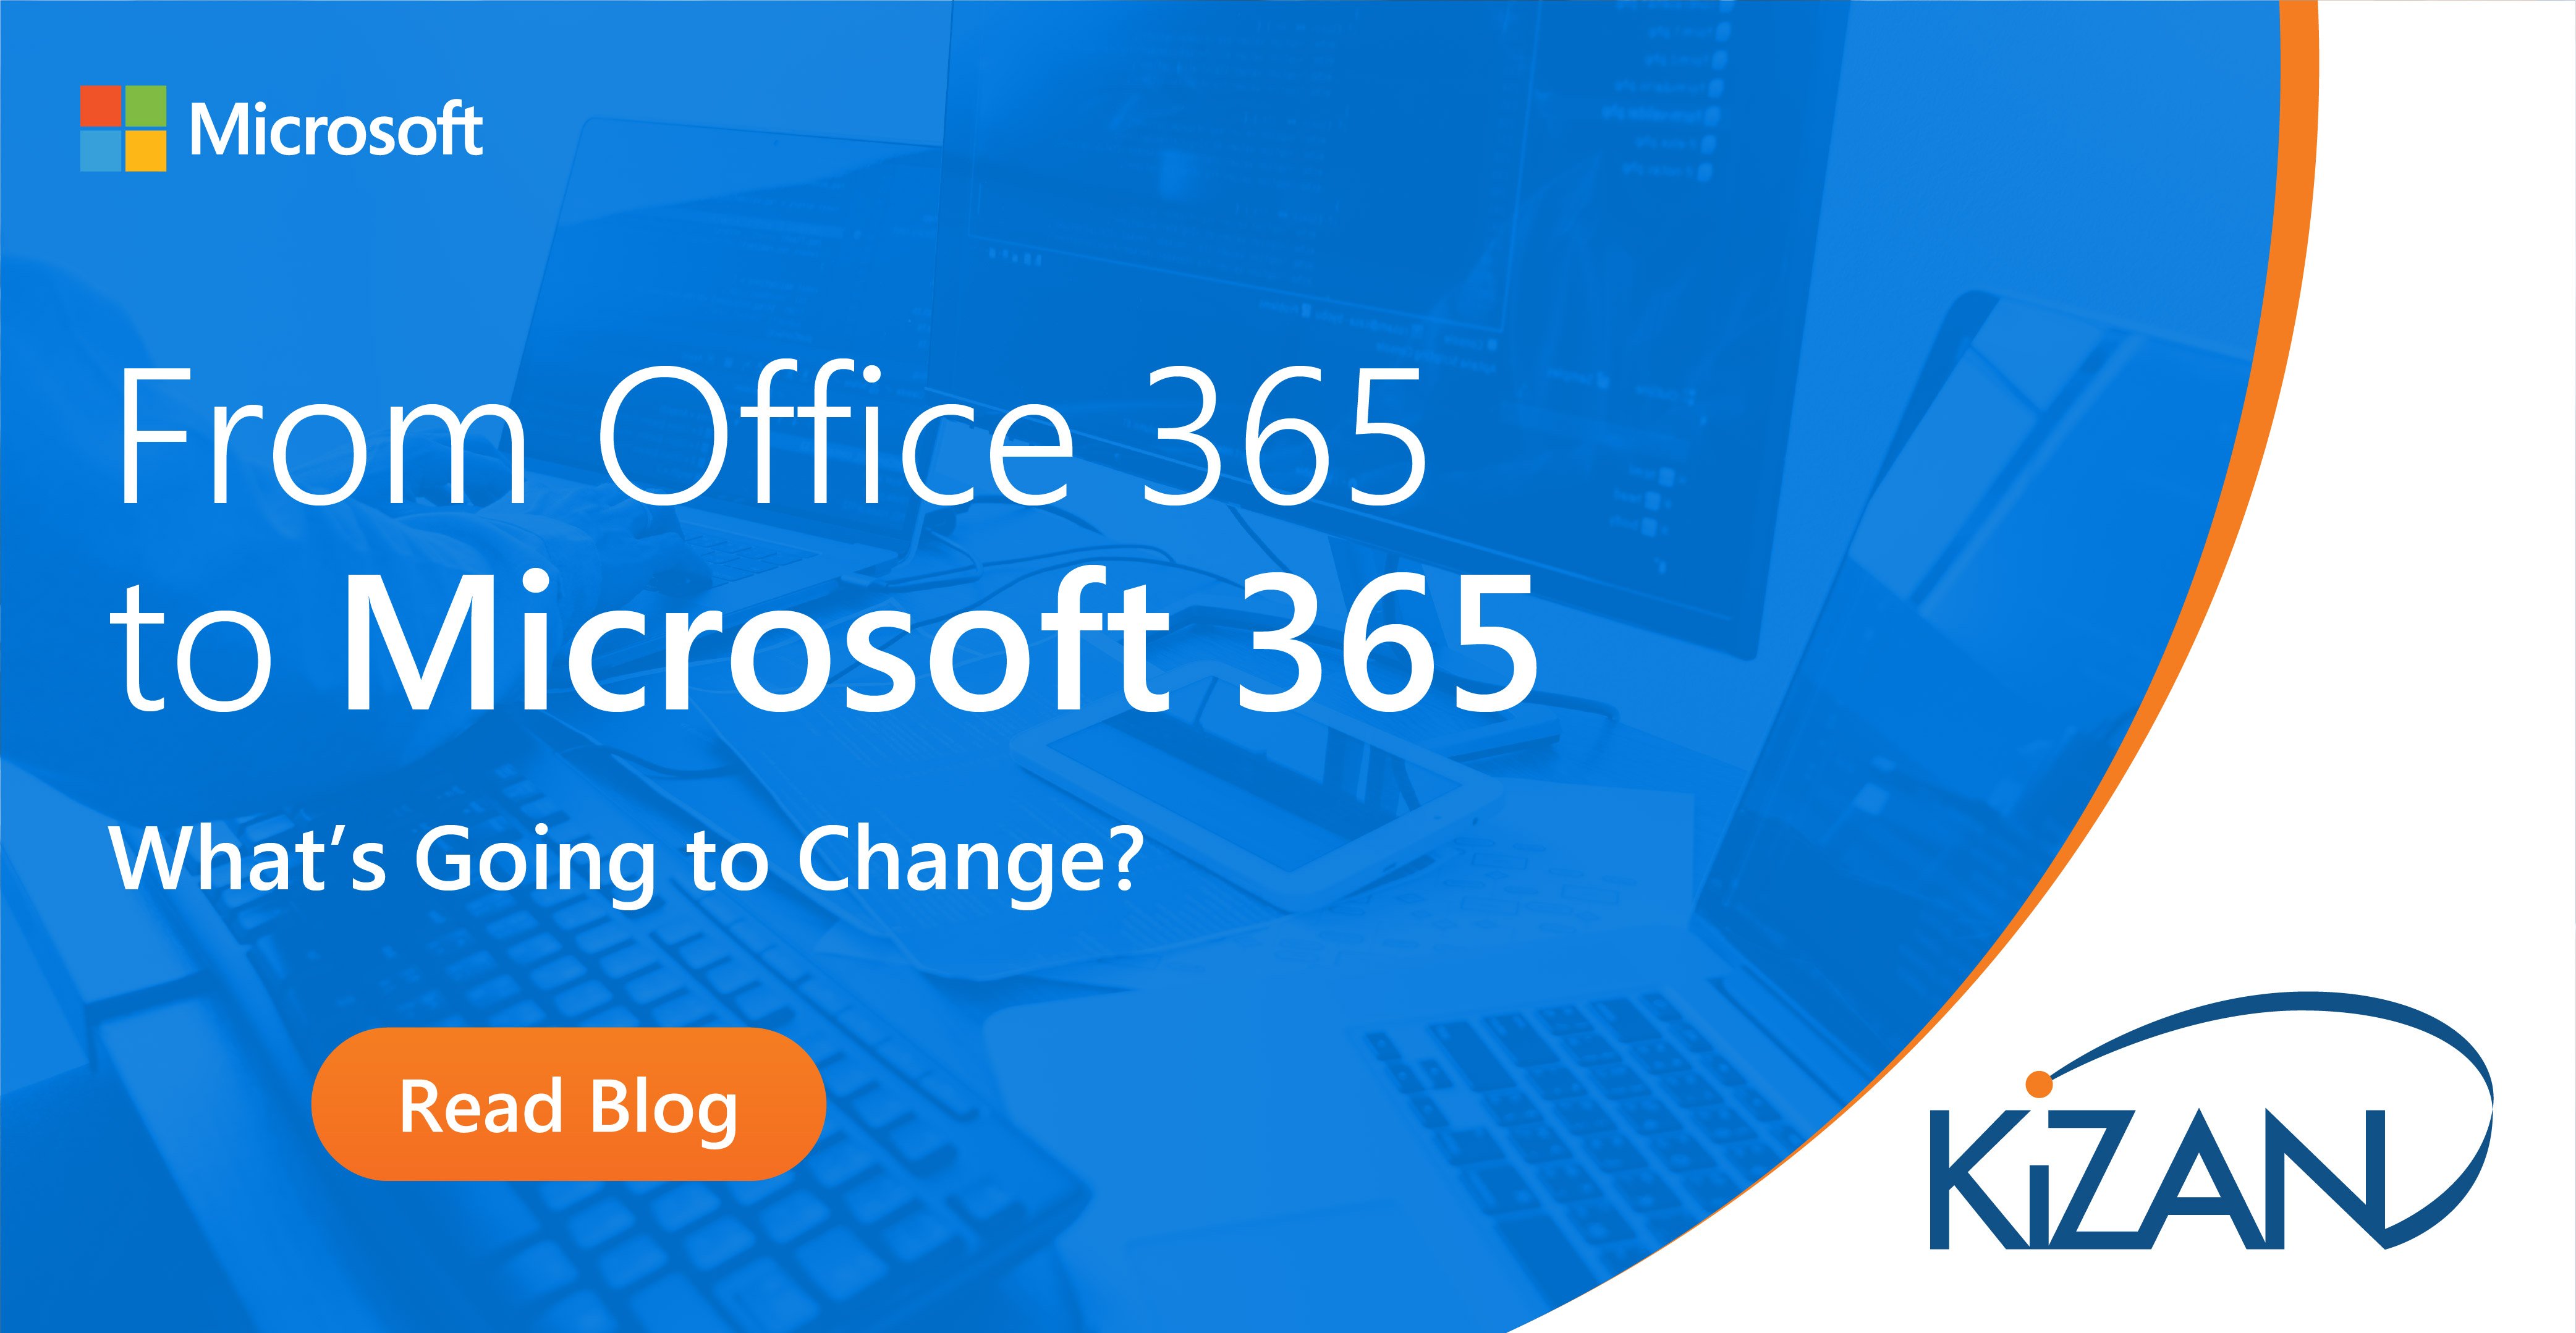 From Office 365 to Microsoft 365 – What’s Going to Change?